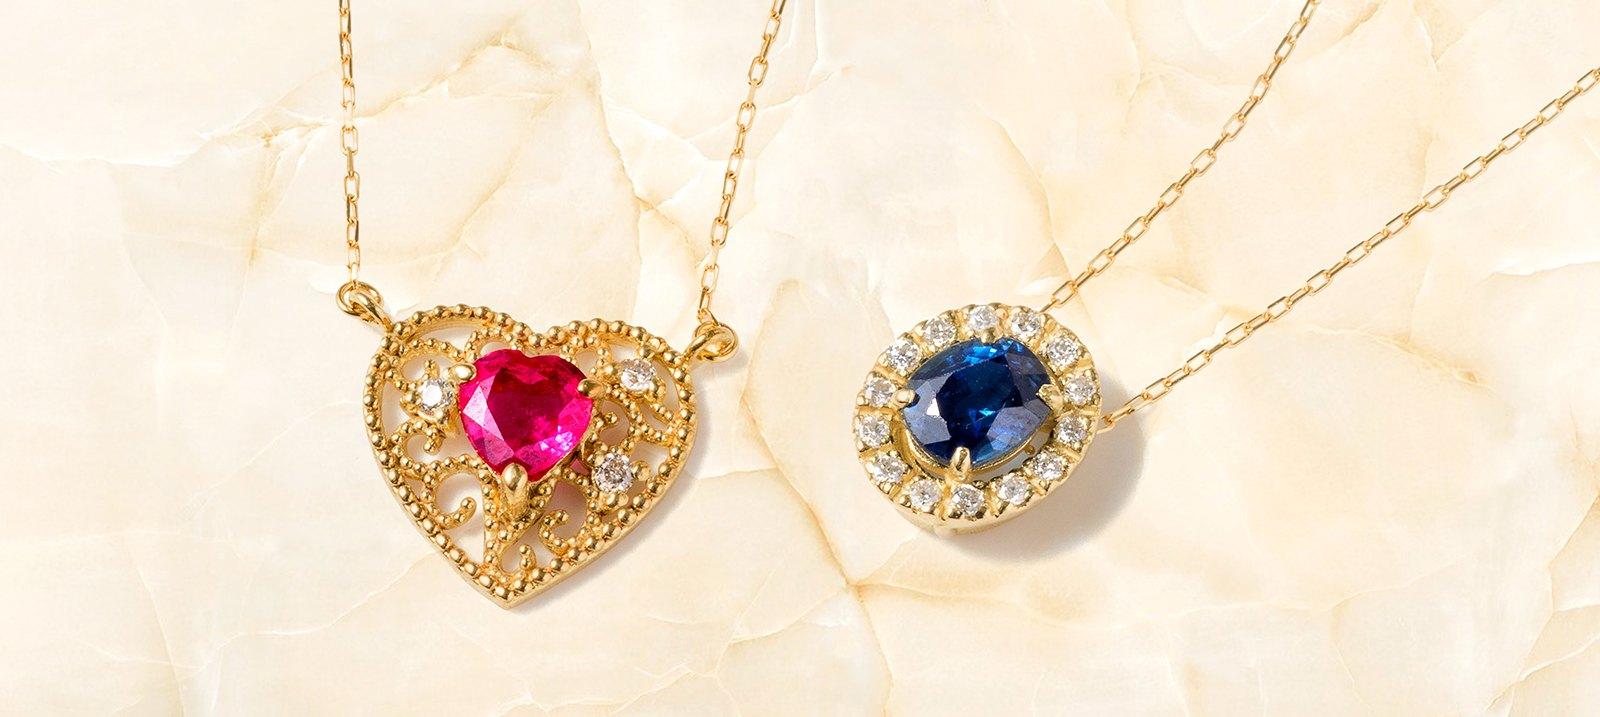 4 SEASONS JEWELRY：Color Stone Collection 